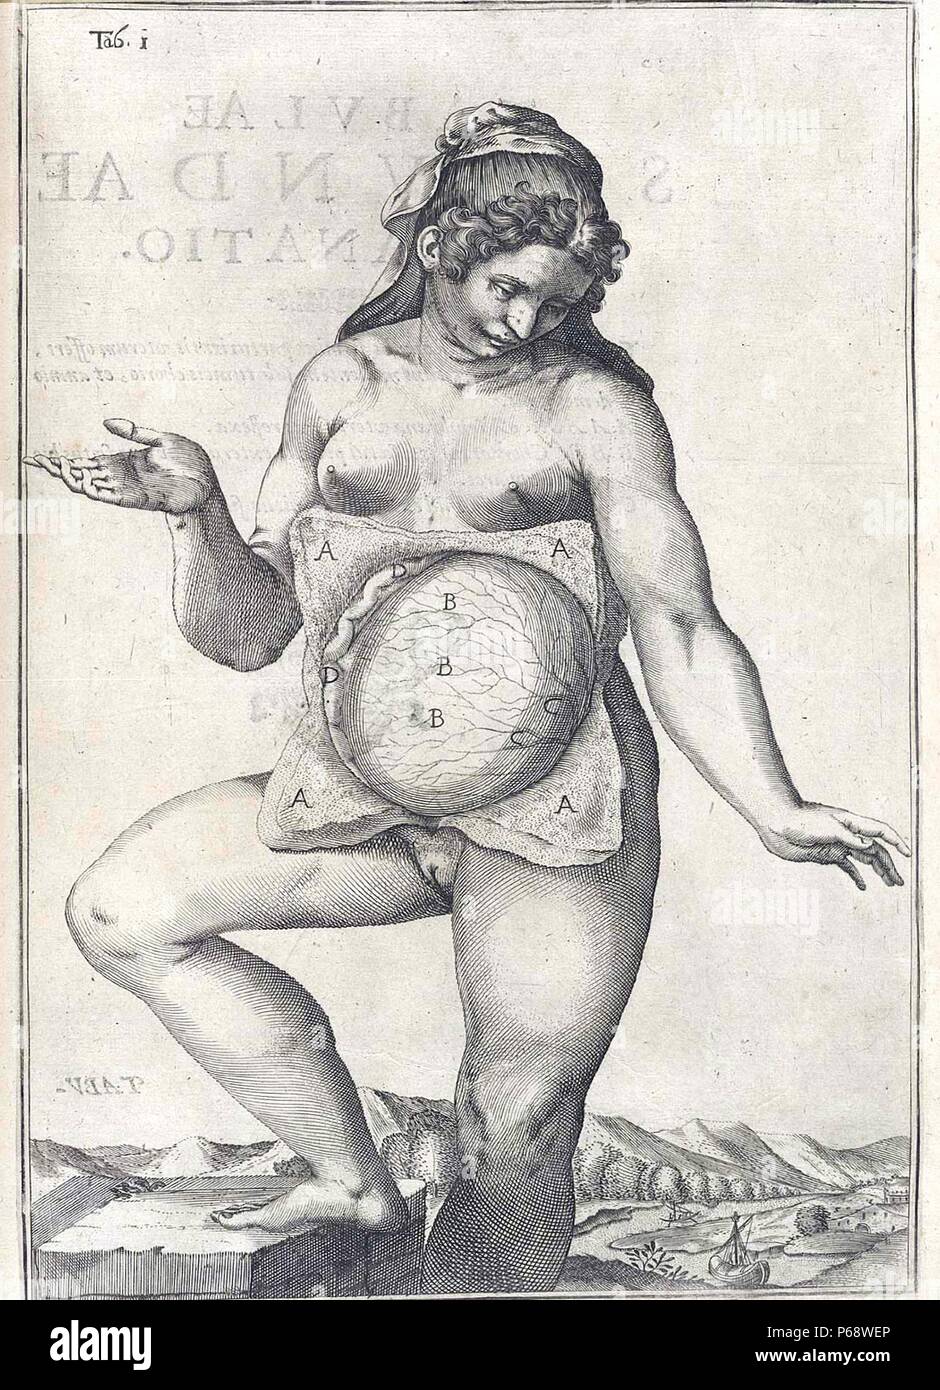 Anatomical drawing of a female body by Adriaan van den Spiegel (1578-1625).  Spiegel was a Flemish anatomist who was born in Brussels and practiced  medicine in Padua. He is known as one